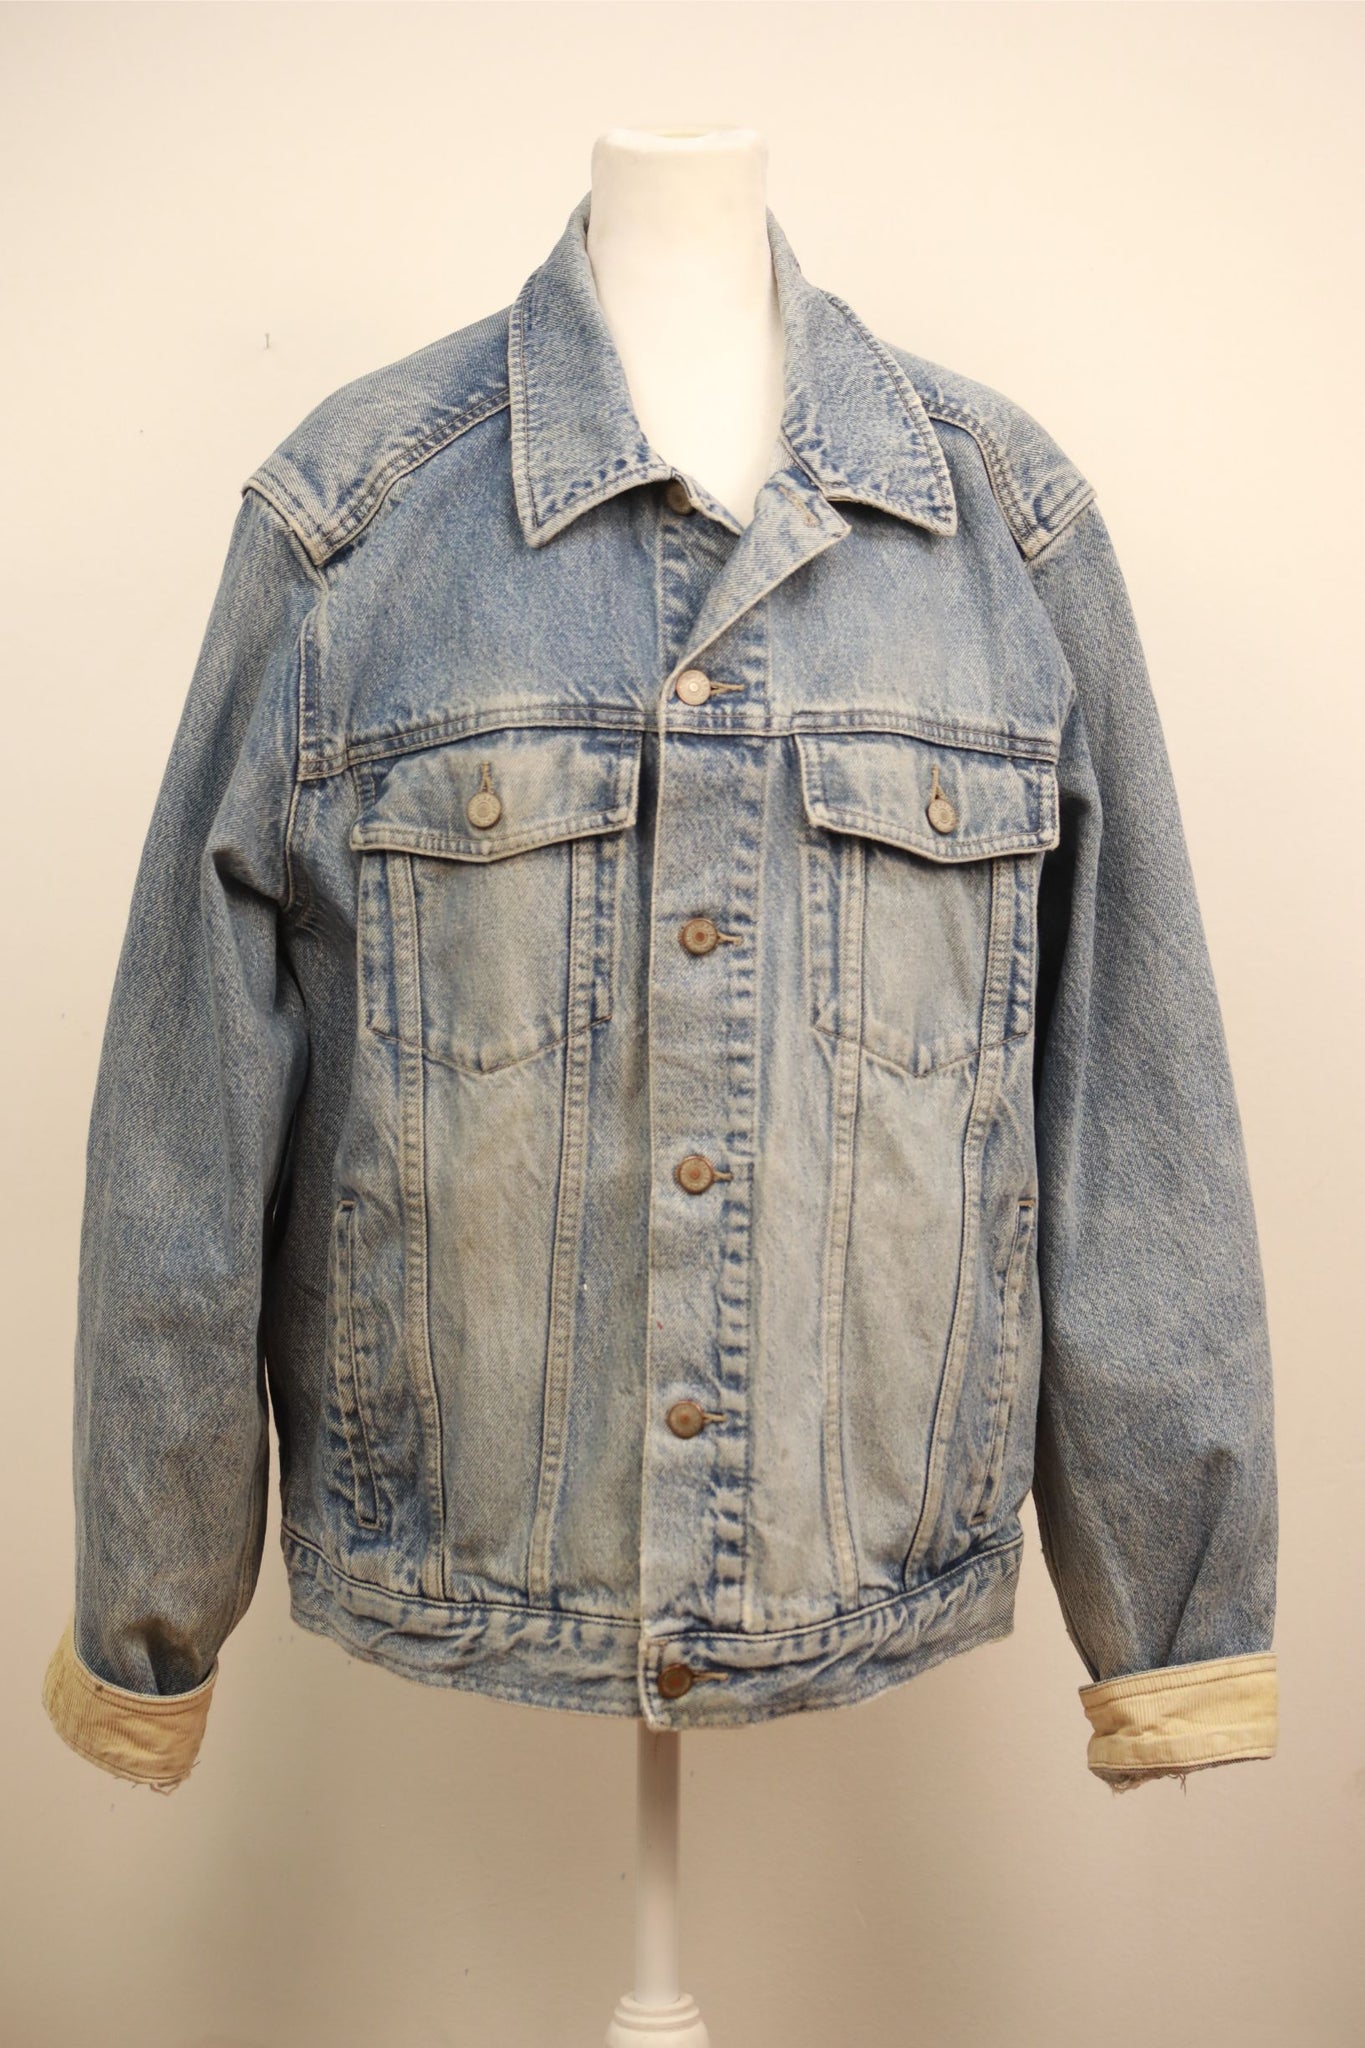 'Carter' Hand-Painted Denim Jacket with Corduroy Details